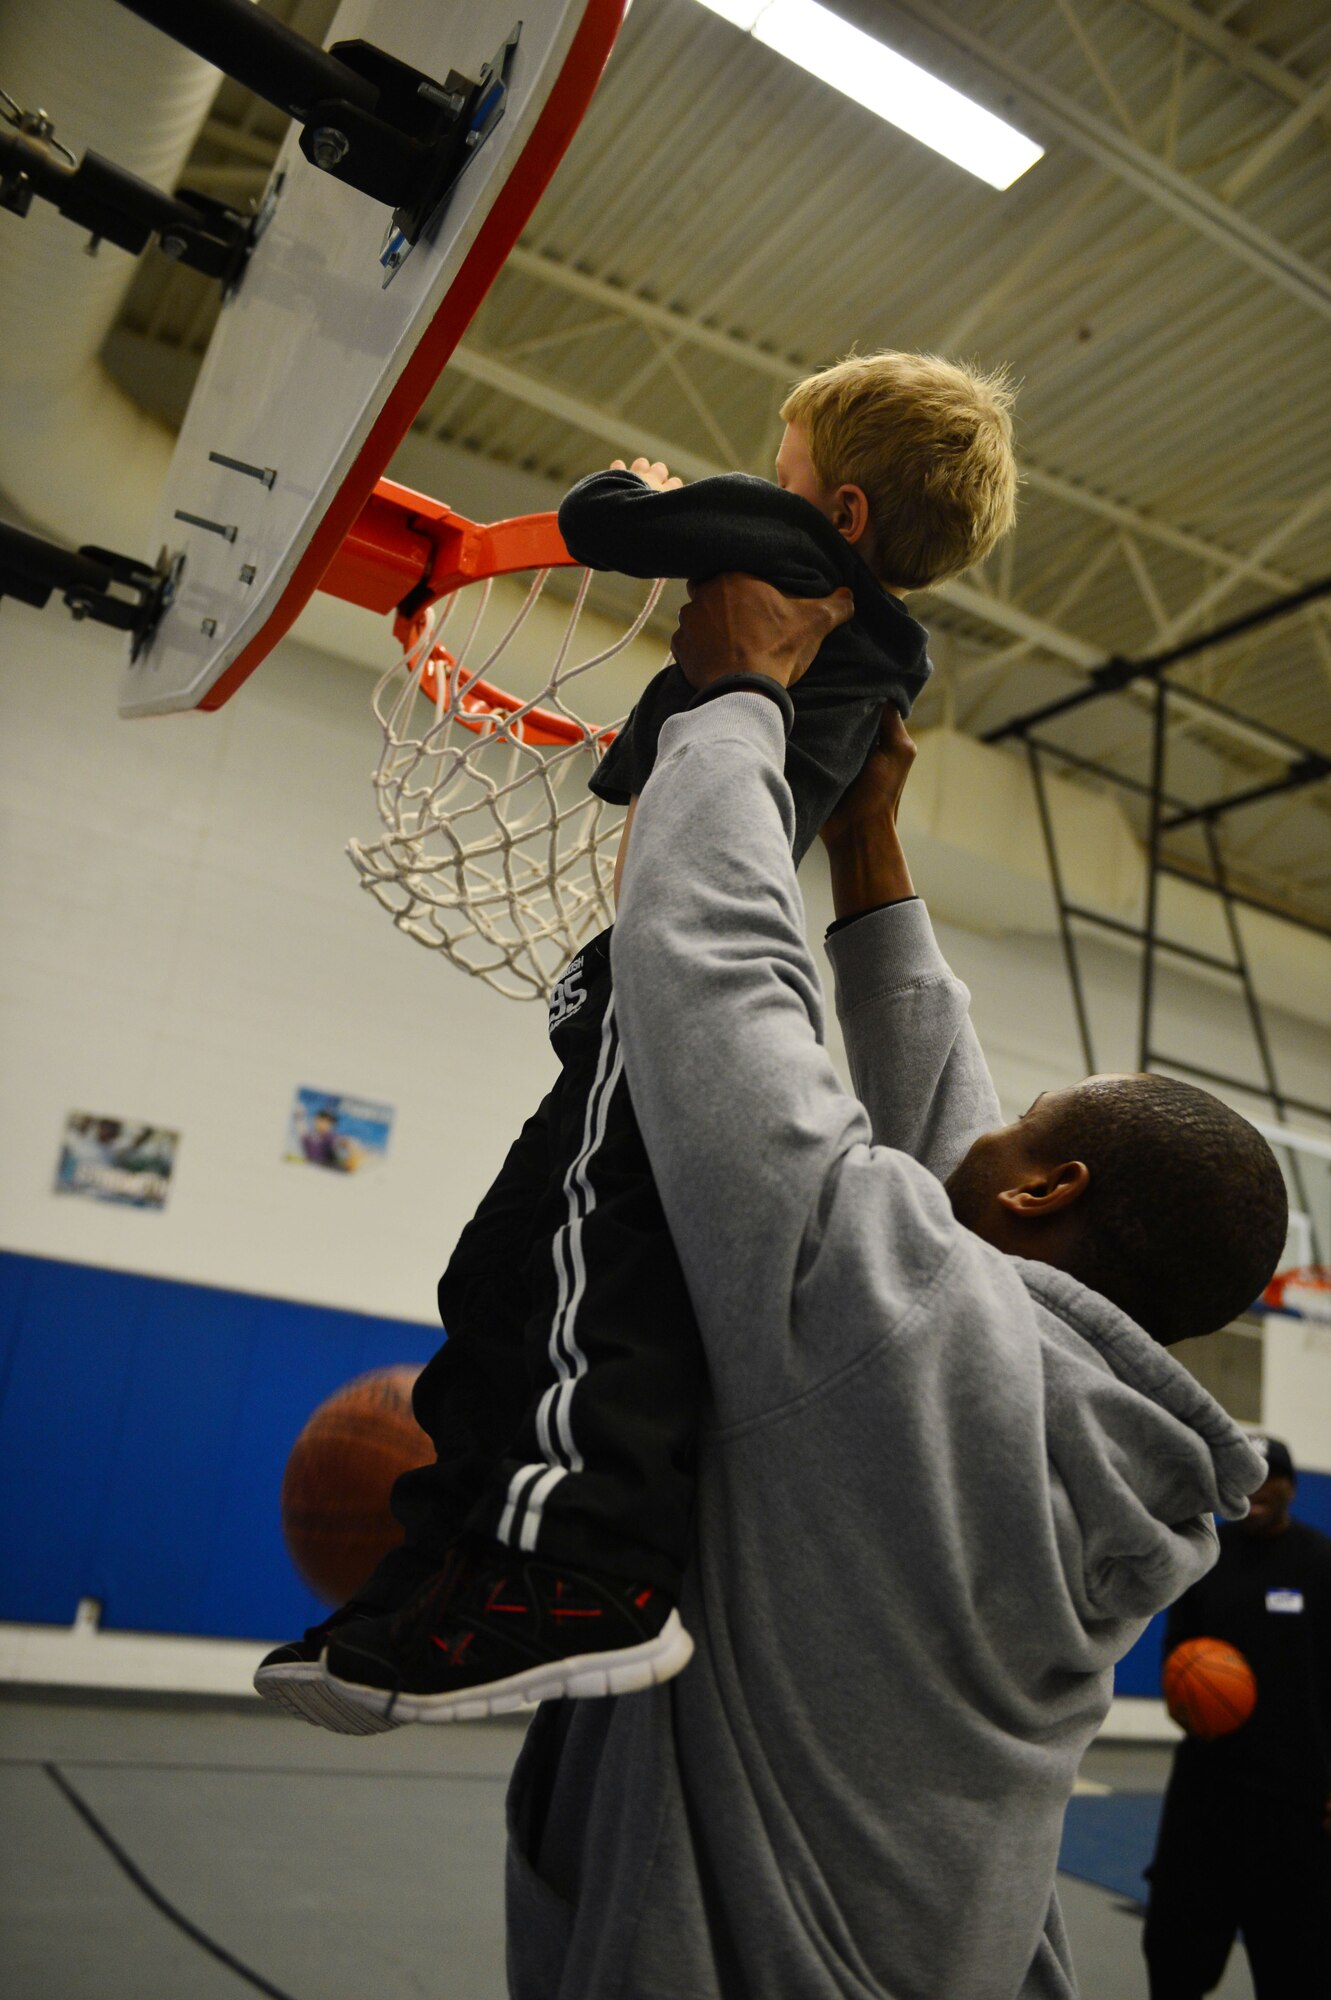 U.S. Air Force Staff Sgt. James Dexter, 27th Special Operations Civil Engineer Squadron, lifts a child up so he can dunk a basketball through the hoop at a youth basketball clinic held in the Youth Center at Cannon Air Force Base, N.M., Feb. 26, 2013. Cannon's men's varsity basketball team hosted a youth basketball clinic for children, ages 6-11, to teach them standard fundamentals of the game. (U.S. Air Force photo/Airman 1st Class Eboni Reece)